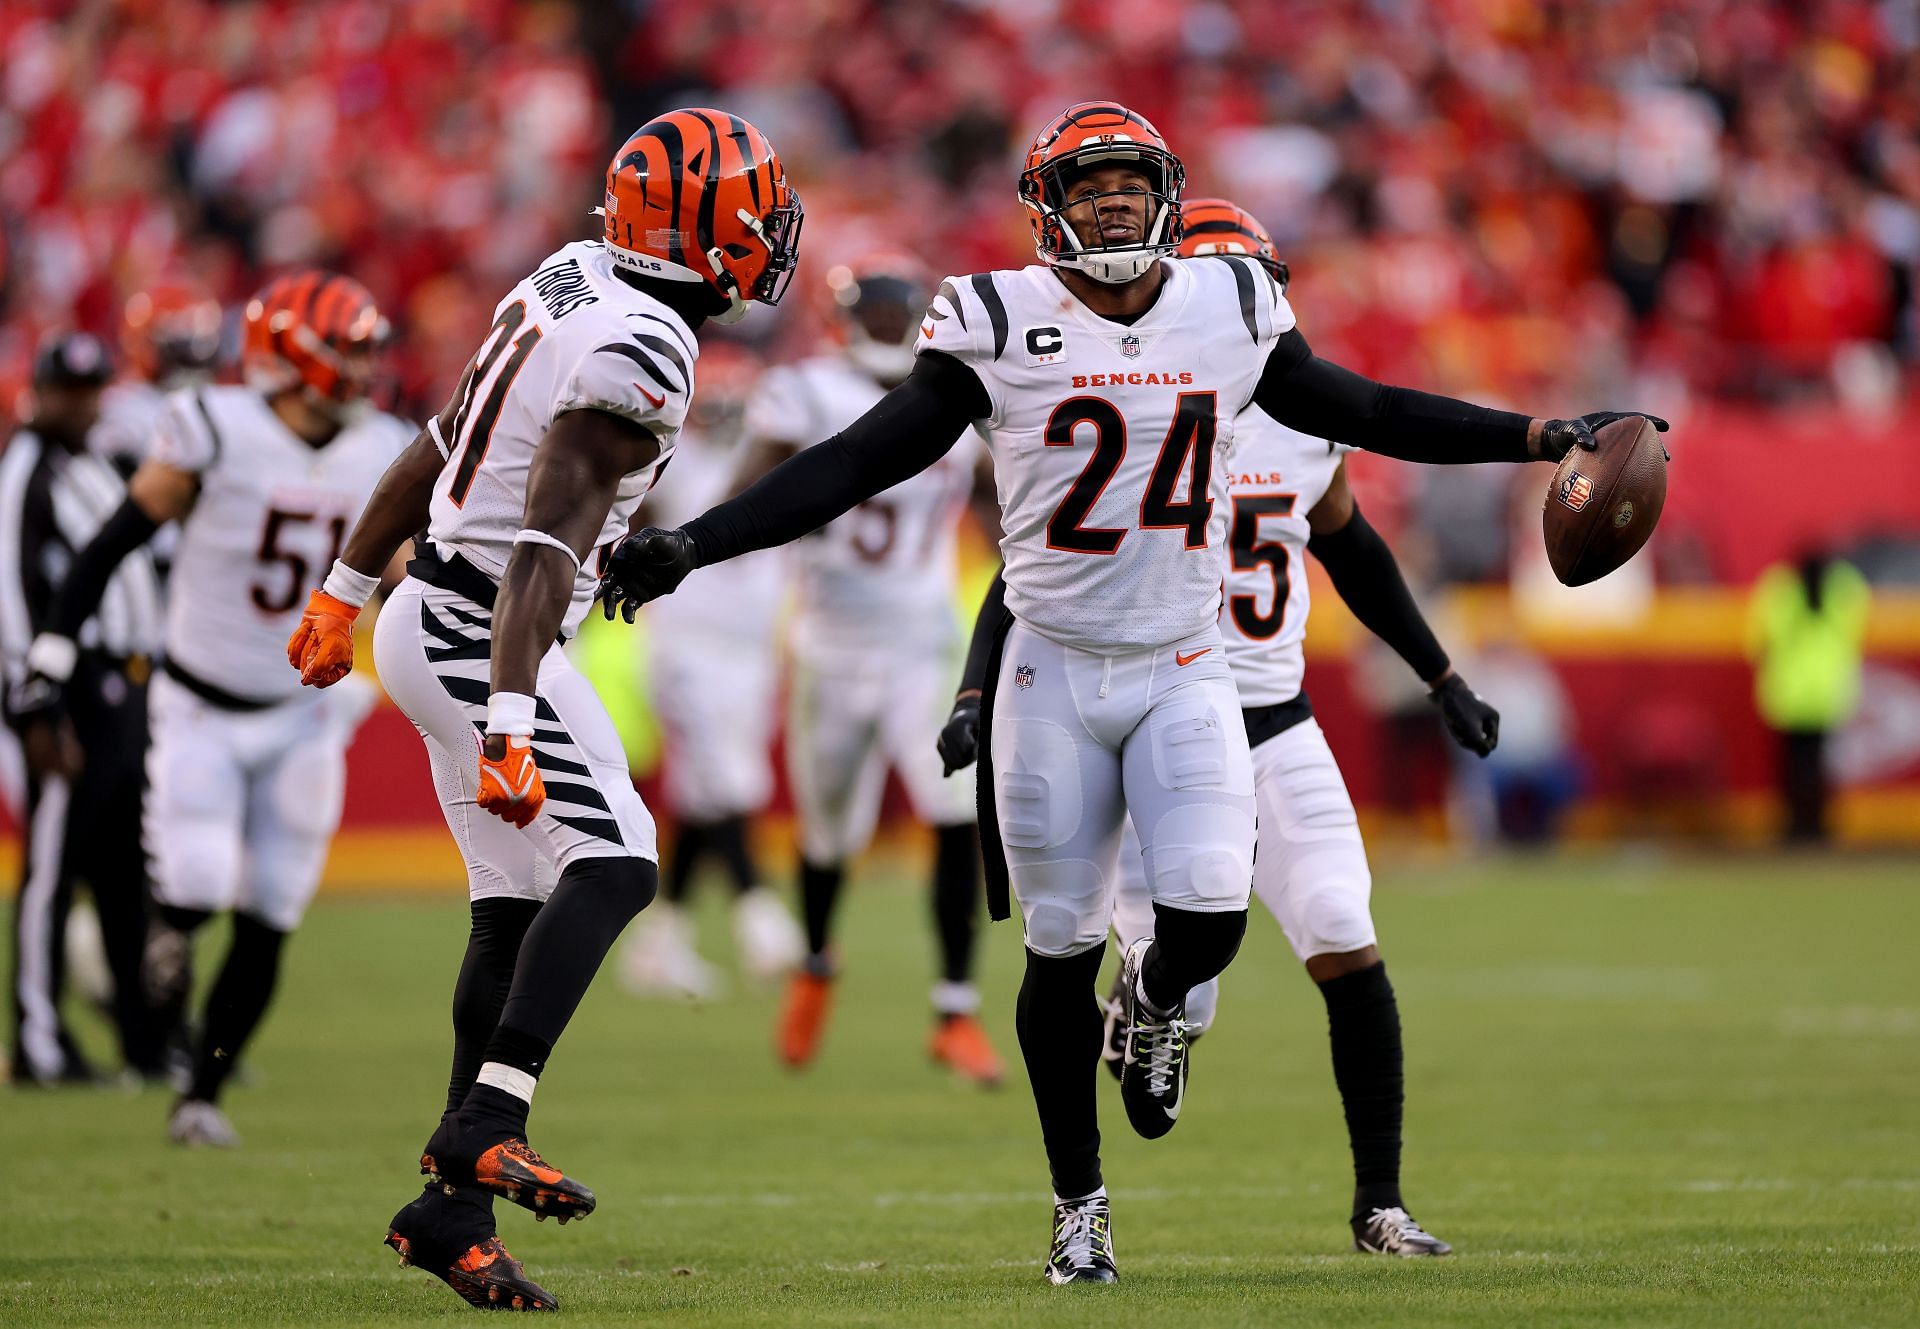 The Cincinnati Bengals preseason game was full of NFL action and a little humor